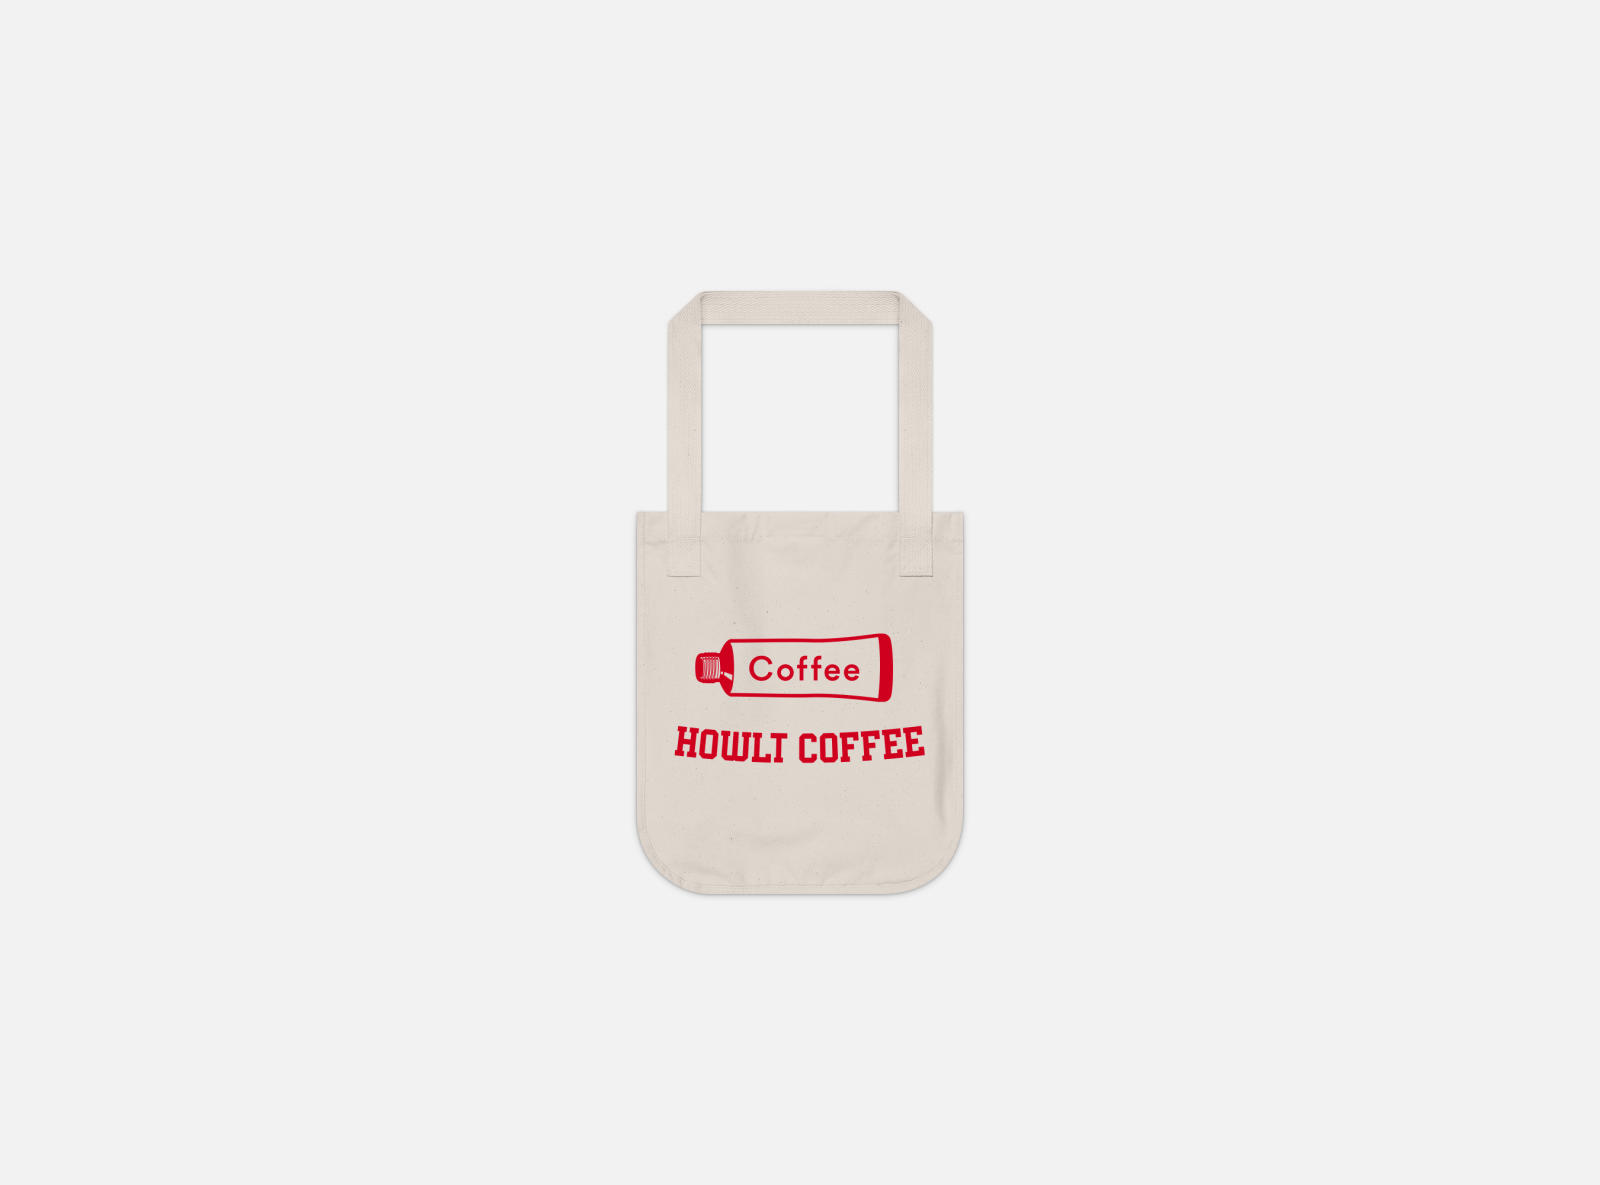 Tote bag with Howlt Coffee's classic logo printed on it